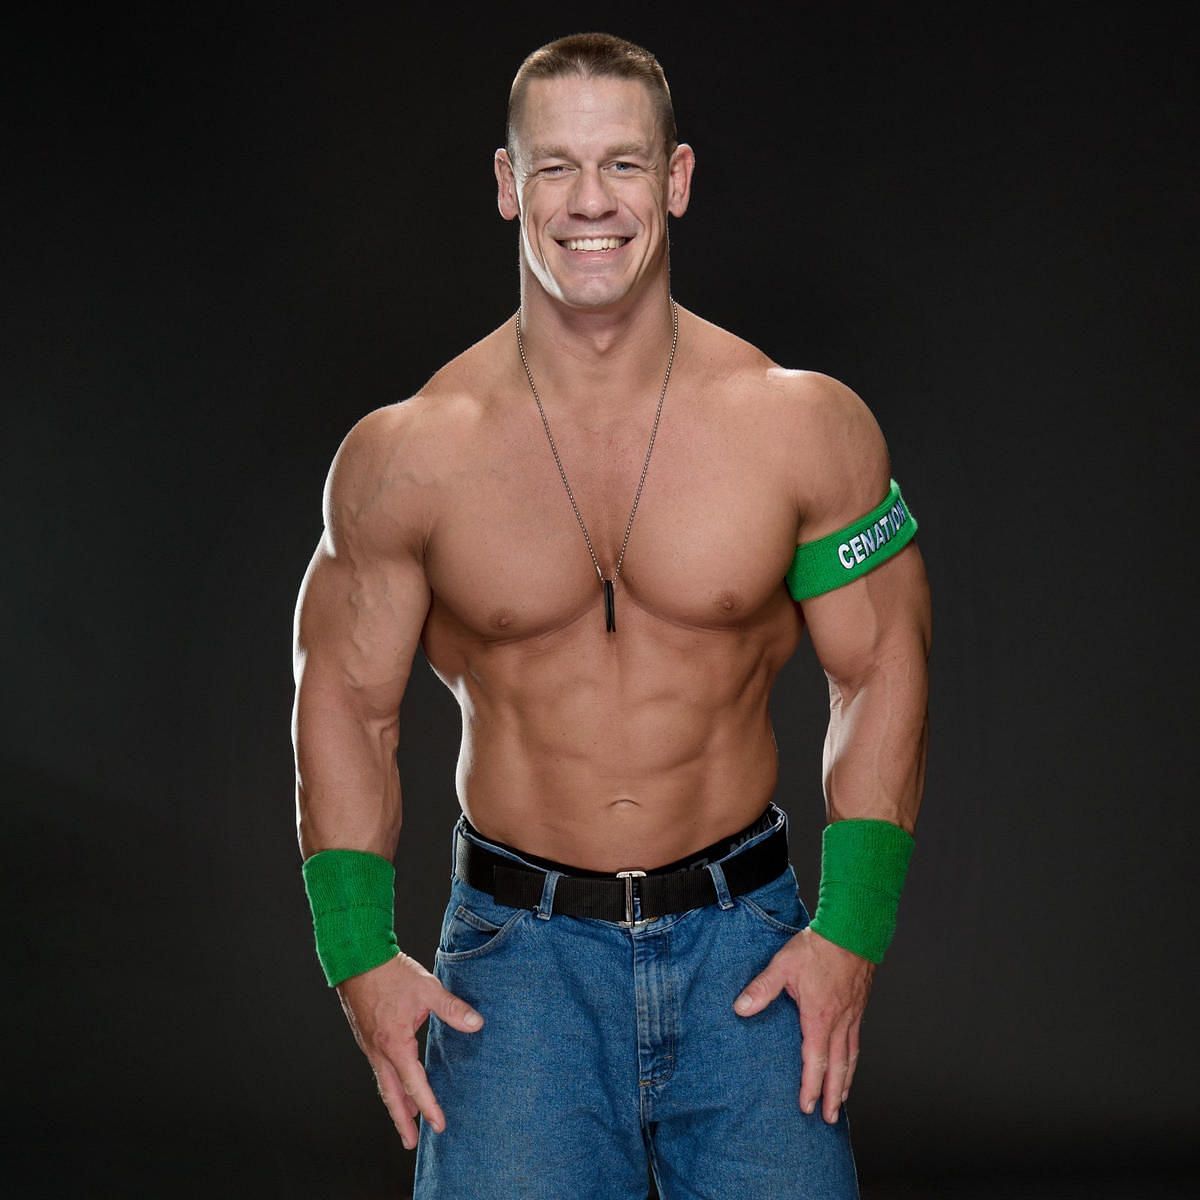 Ultimate Collection of 999+ Spectacular John Cena Images in Full 4K Resolution